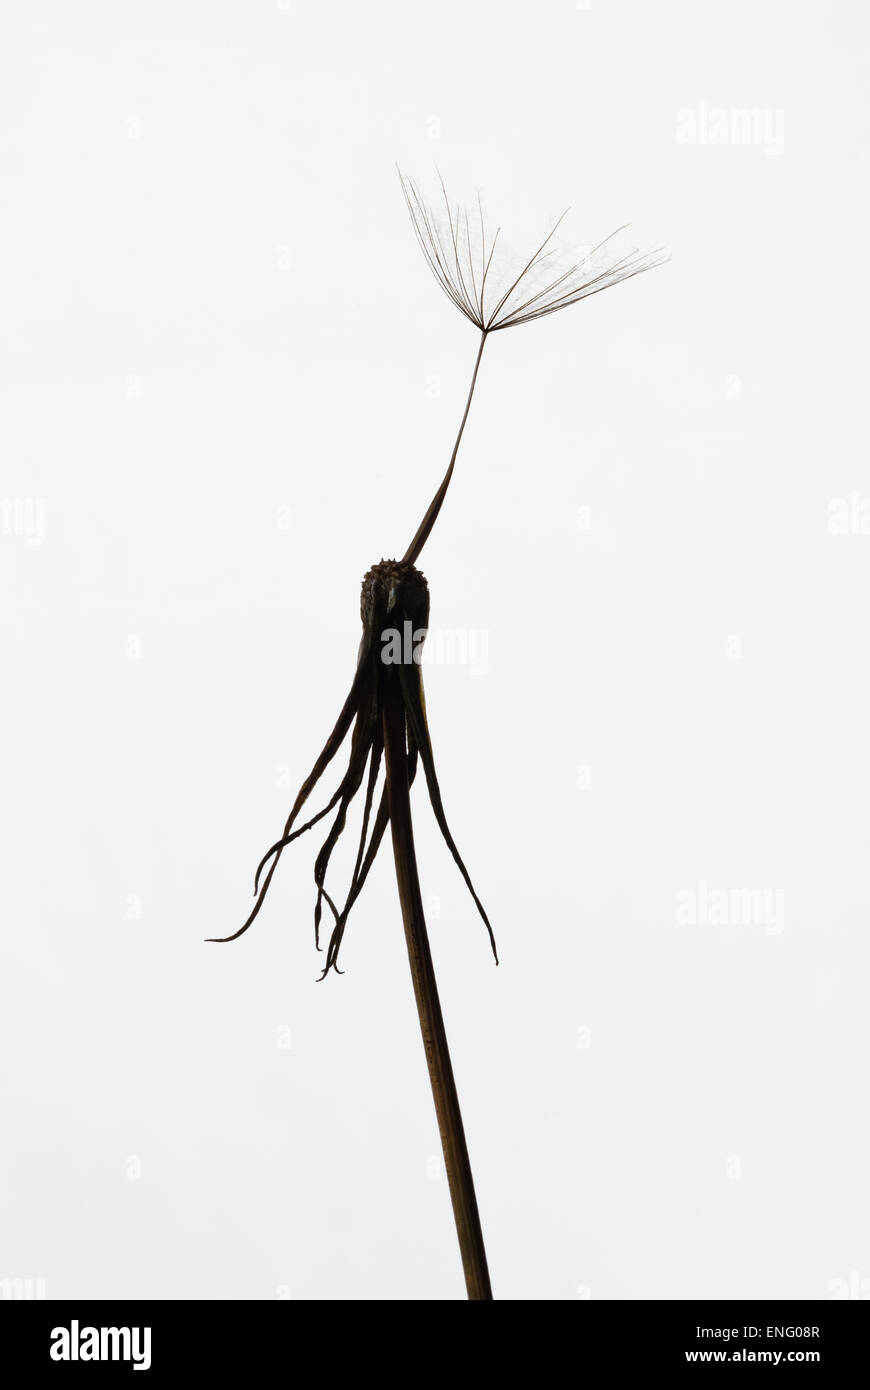 single last lonely seed head on old dandelion flower waiting to be blown off and its all over no more Stock Photo